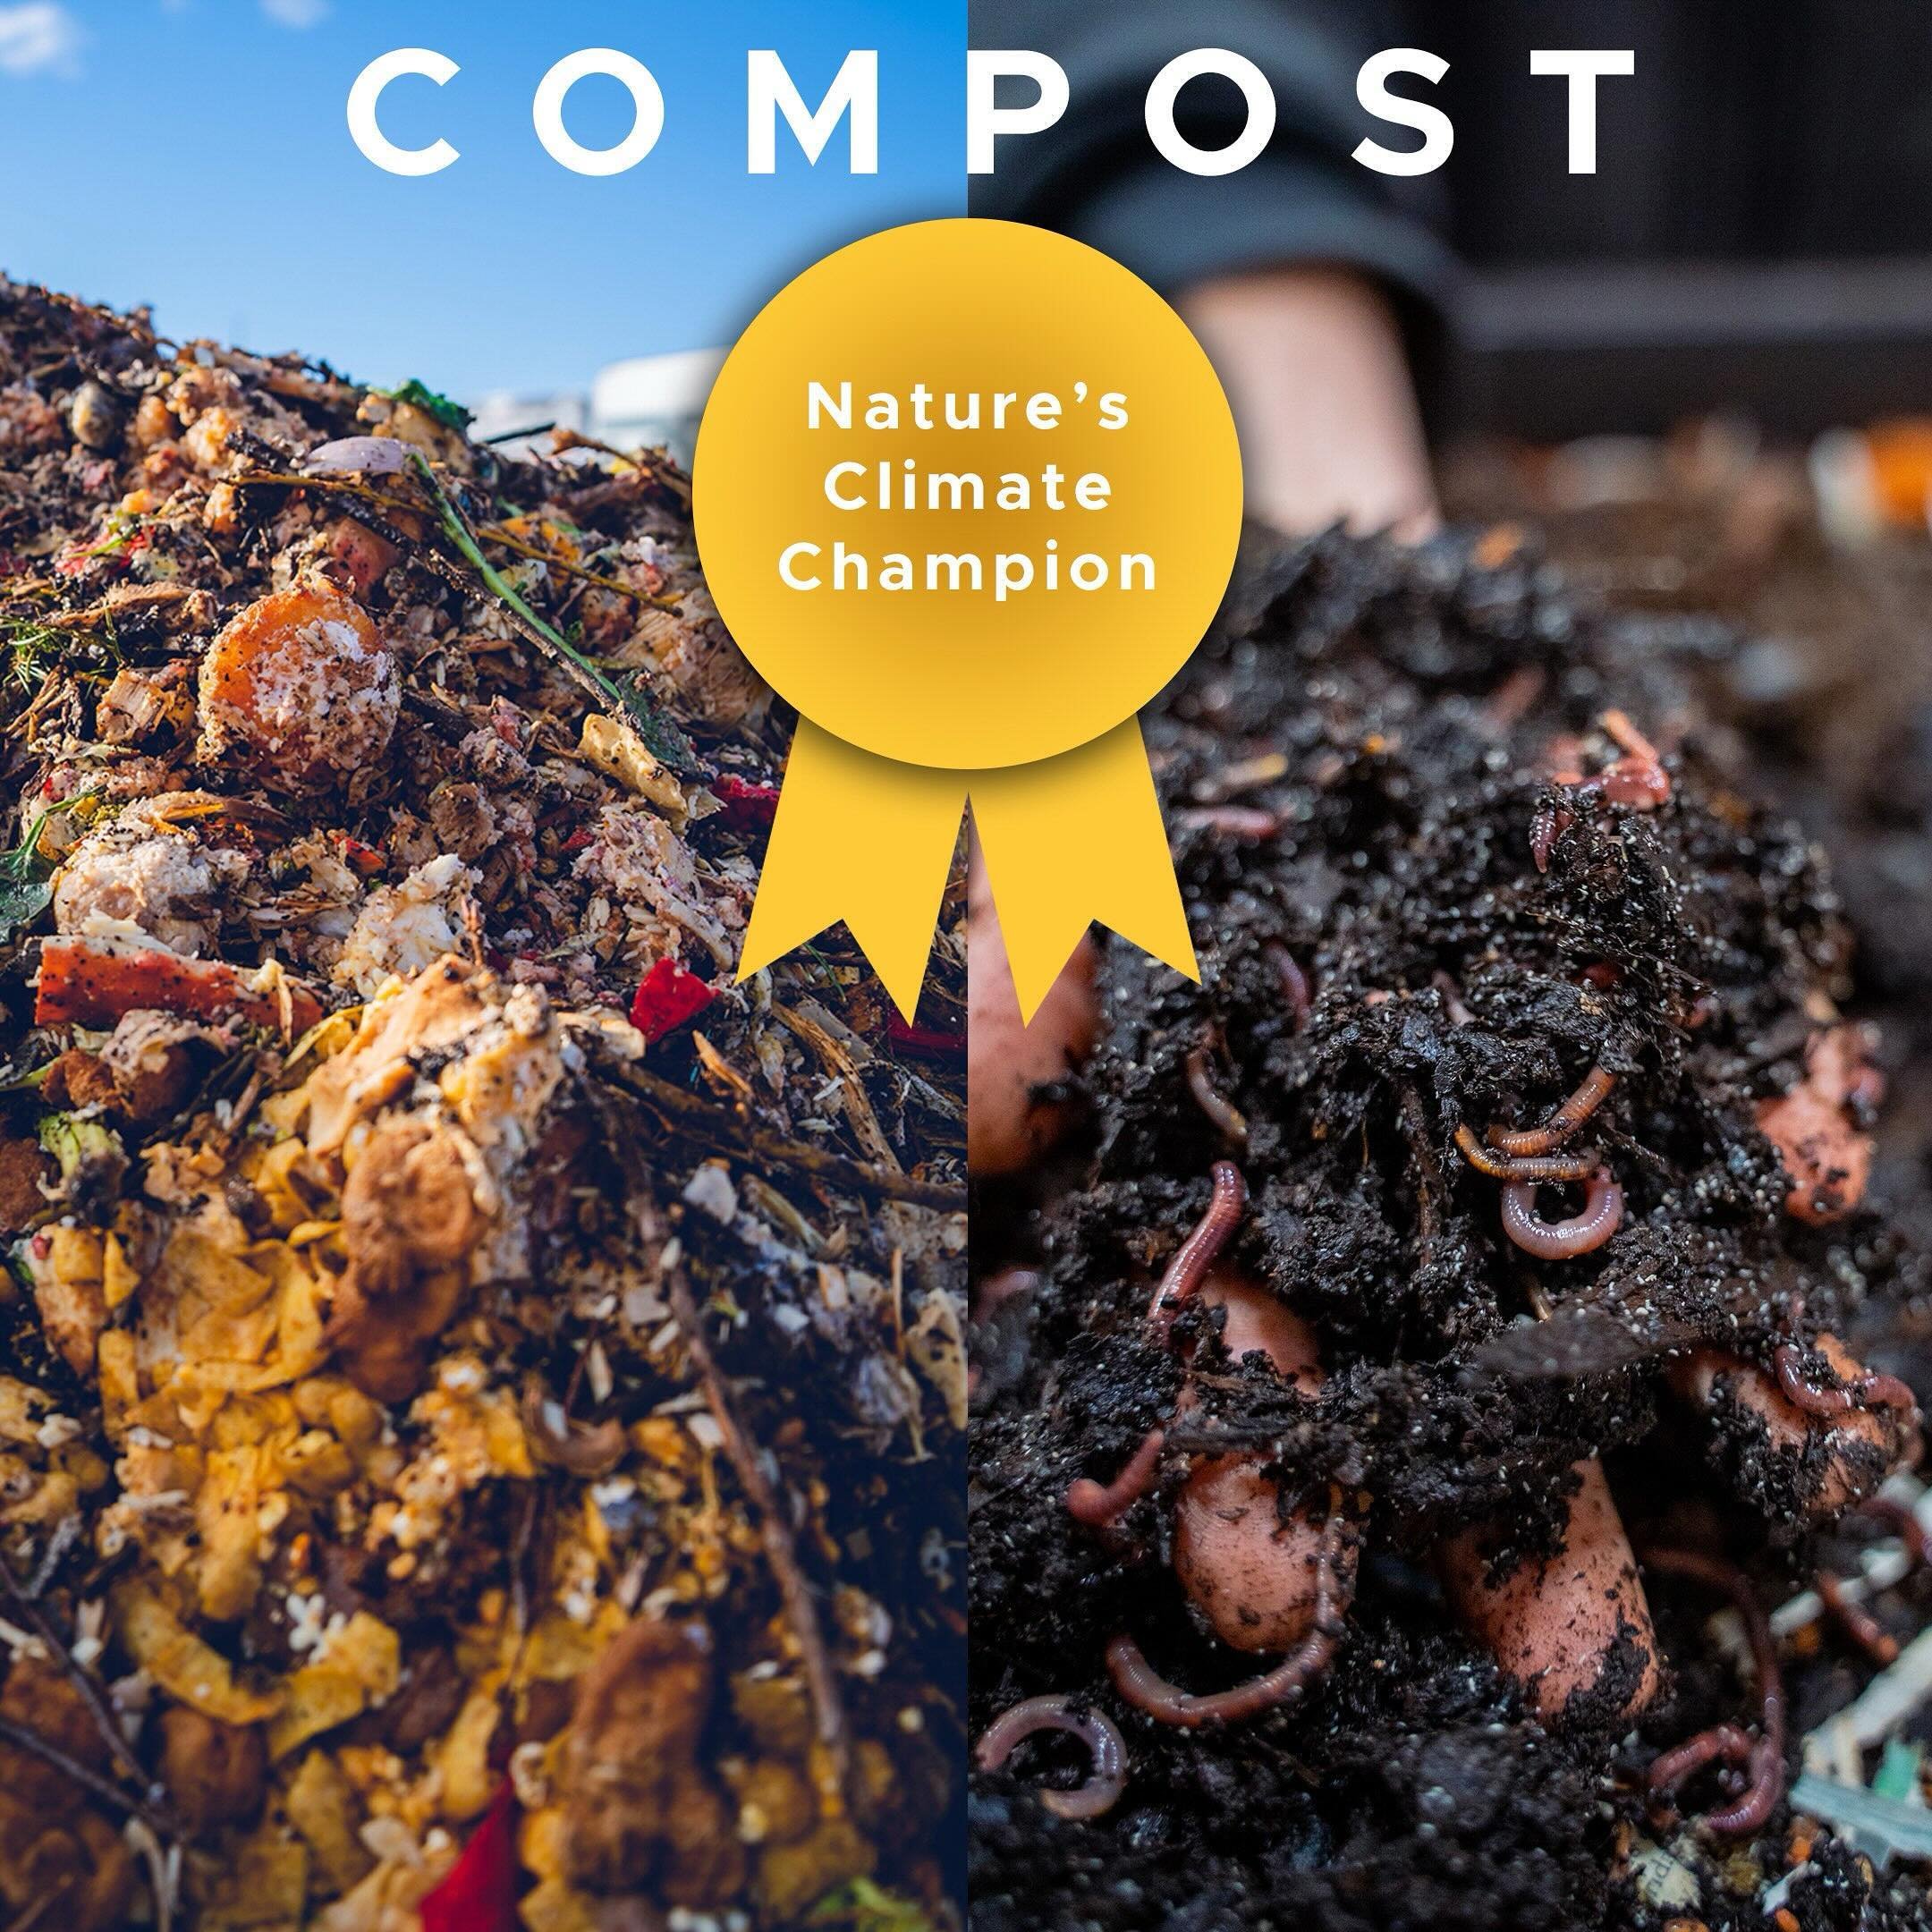 Thank you to all of our composting champions: YOU! 🏆 As we celebrate International Compost Awareness Week, we extend heartfelt appreciation to all of our composters in our community and across the world in reducing methane and fighting climate chang